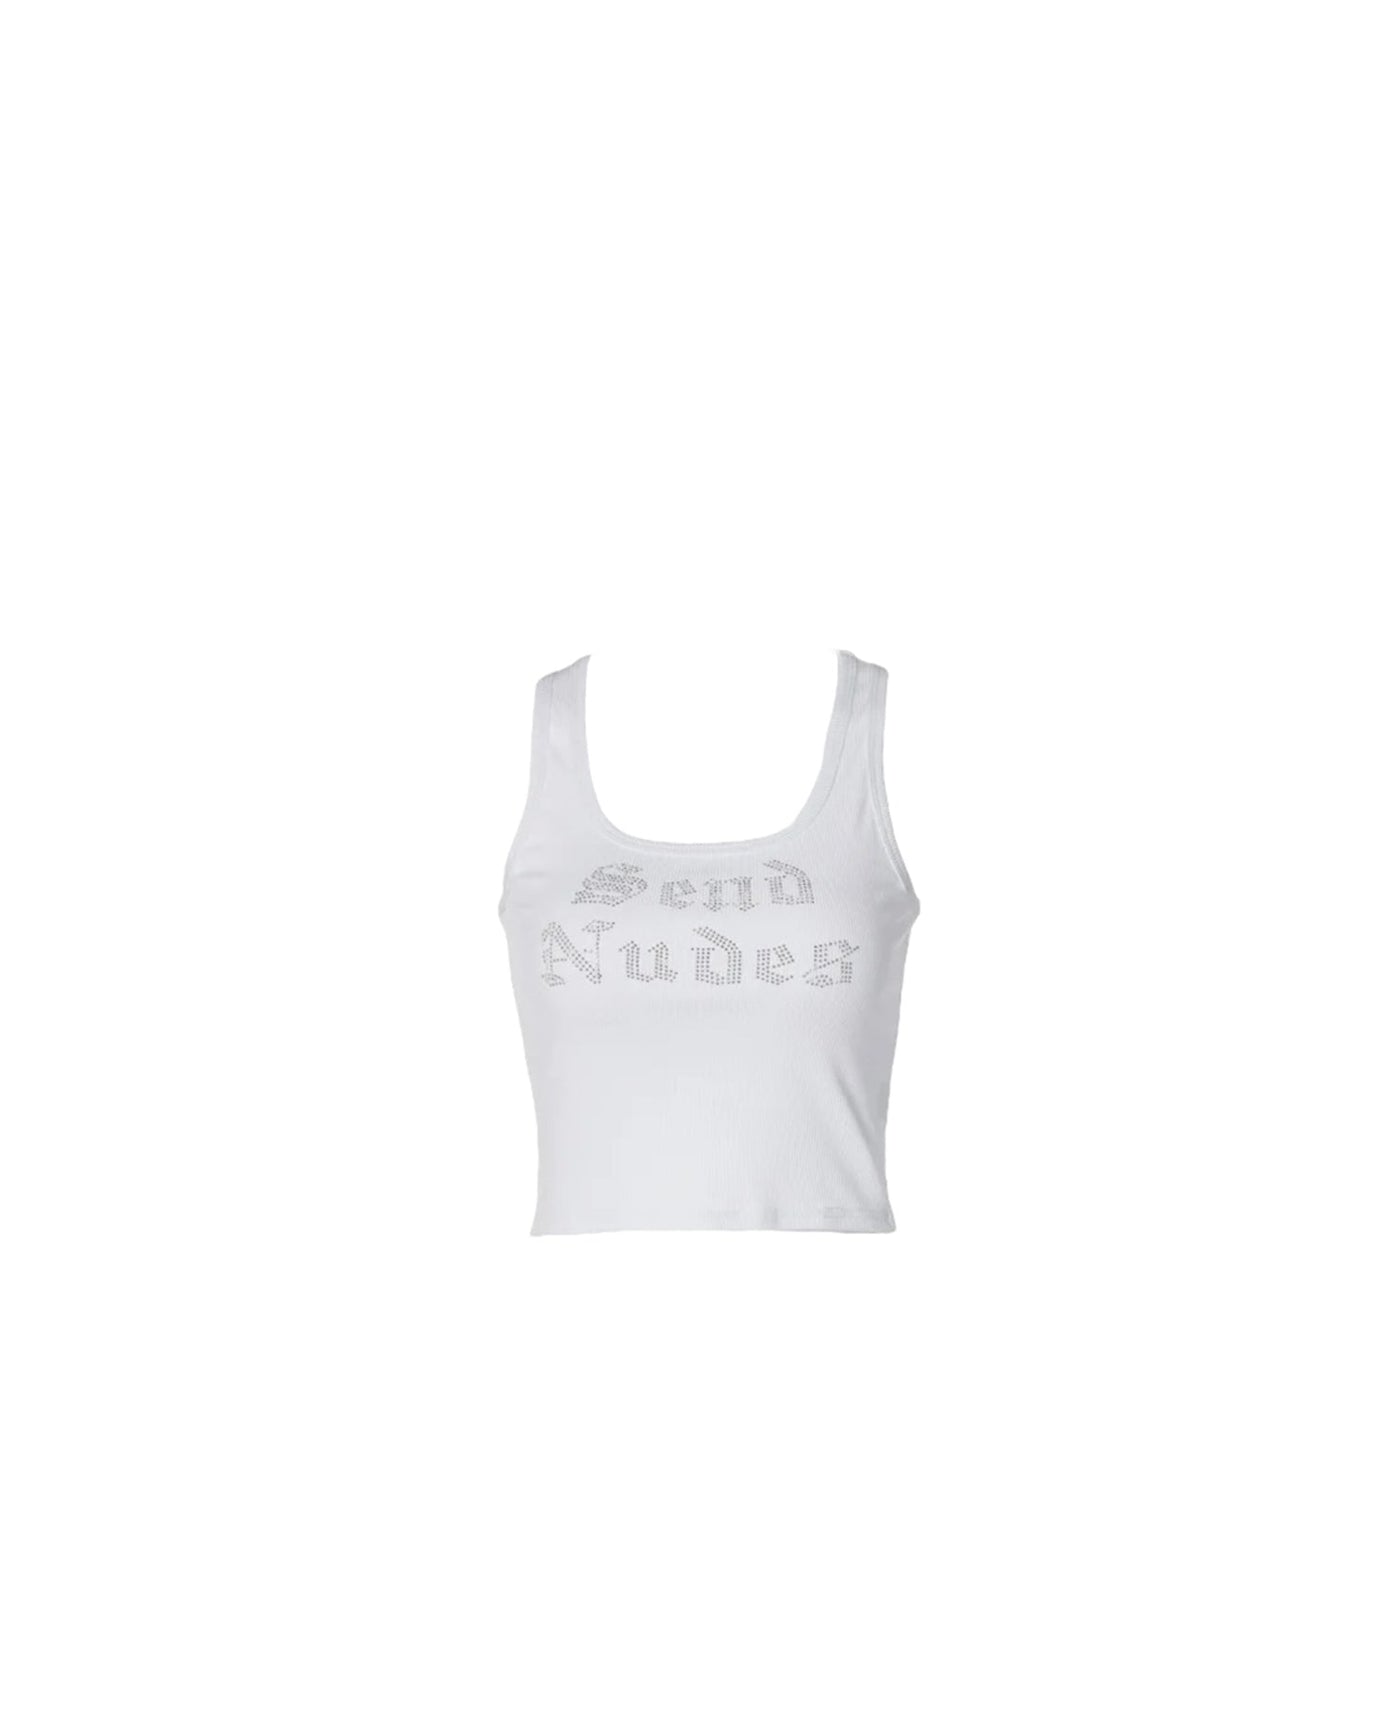 Send The Goods Crop Tank Top - Dezired Beauty Boutique